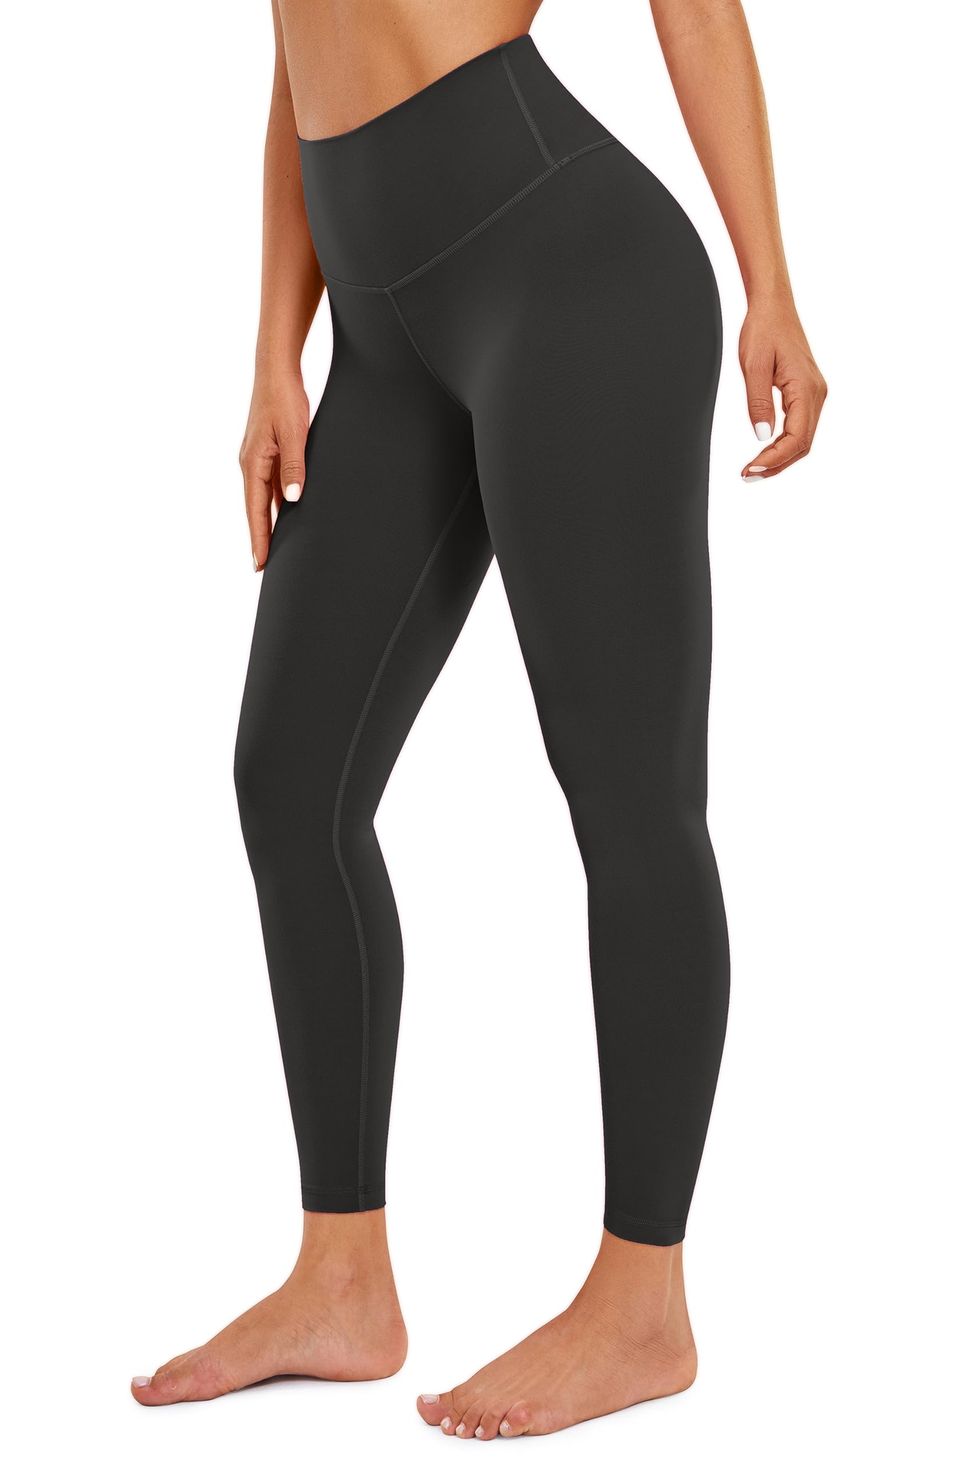 Rocky High Waisted Yoga Leggings, Workout Running Activewear Tummy